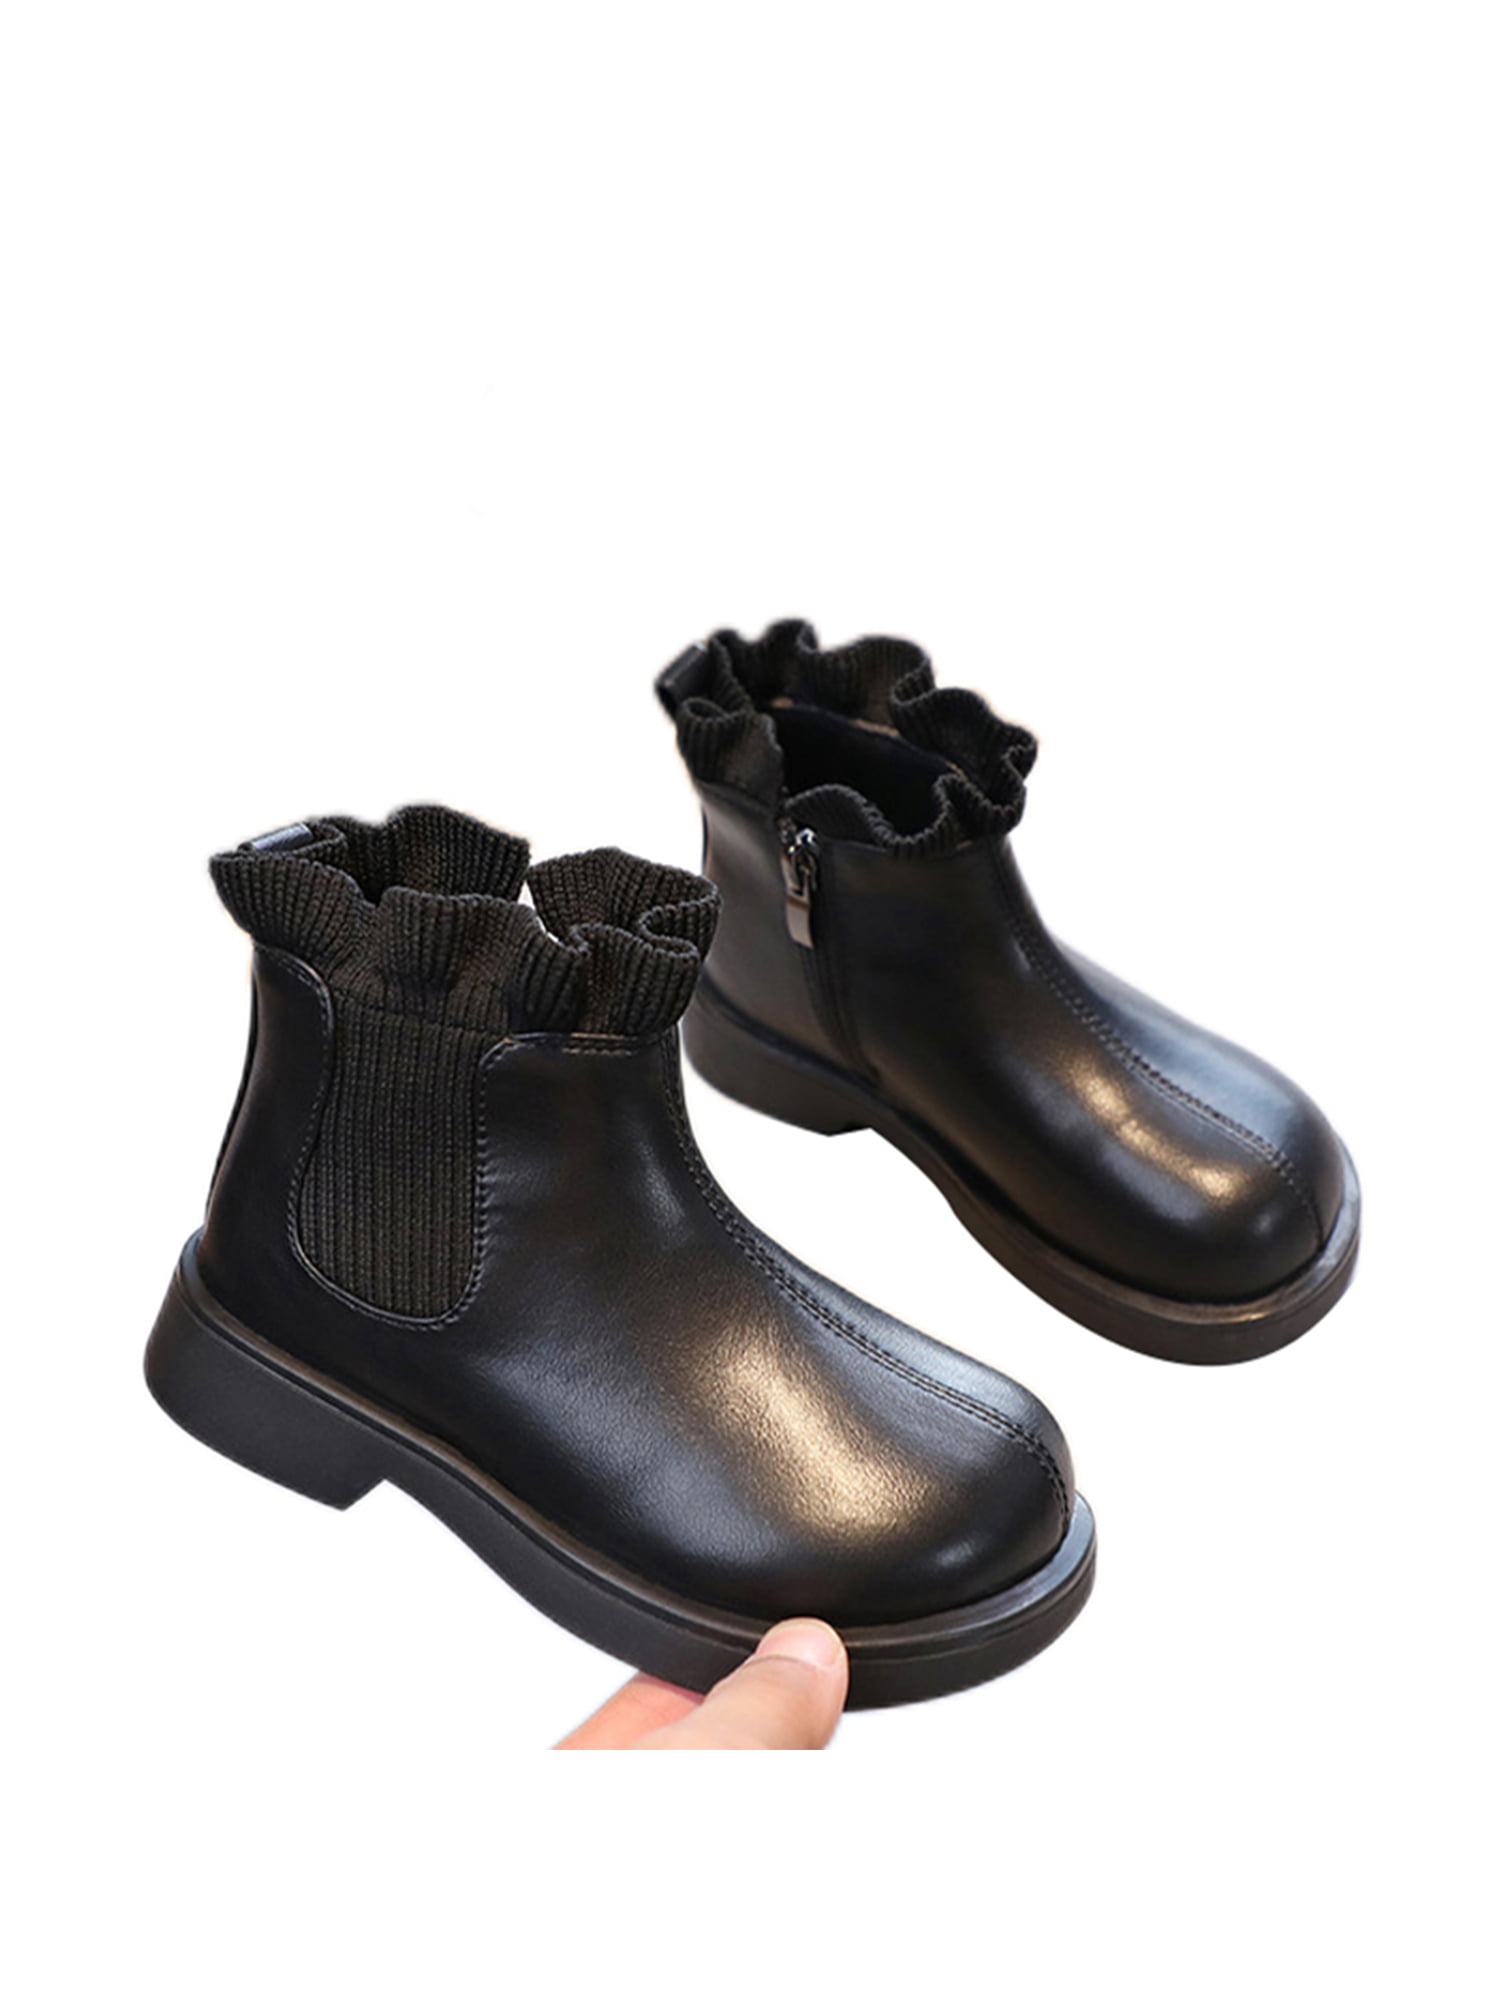 Link Borger telex Gomelly Children Chelsea Boots Elastic Ankle Boot Waterproof Short Bootie  Casual Dress Outdoor Hiking Black with Warm Lined 11C - Walmart.com